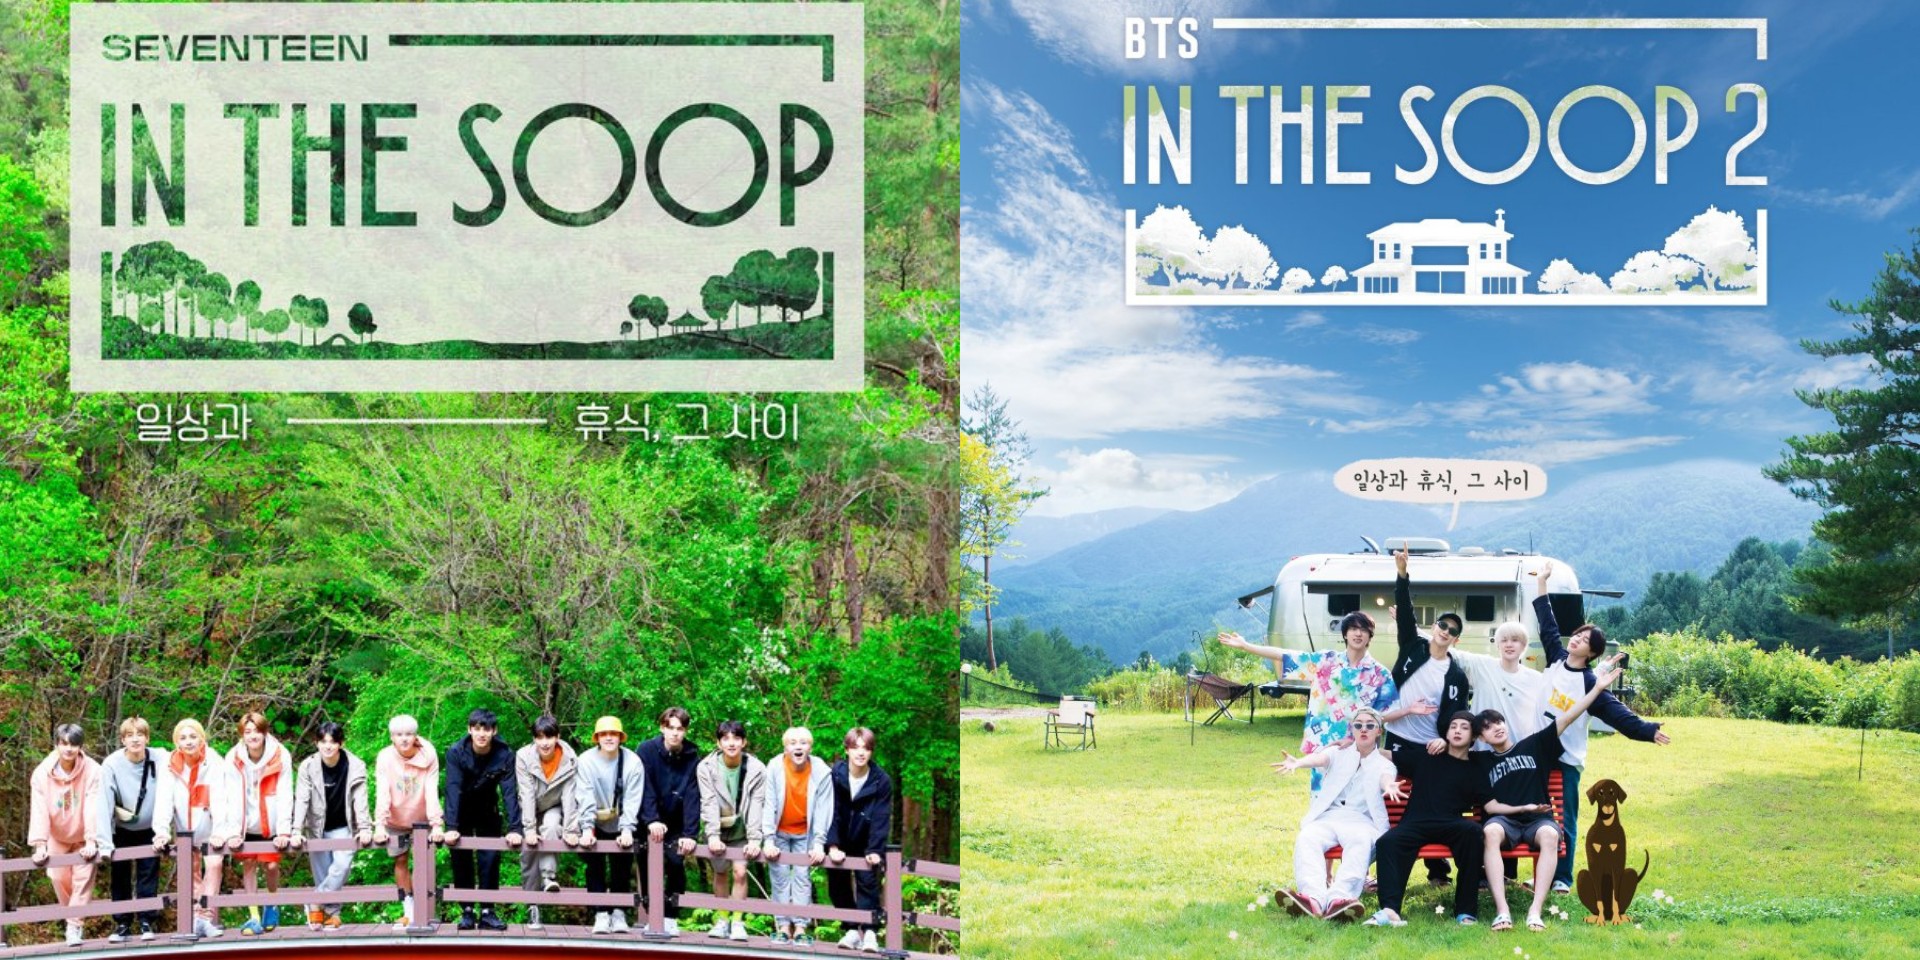 BTS and SEVENTEEN's IN THE SOOP POP-UP store is coming to Singapore